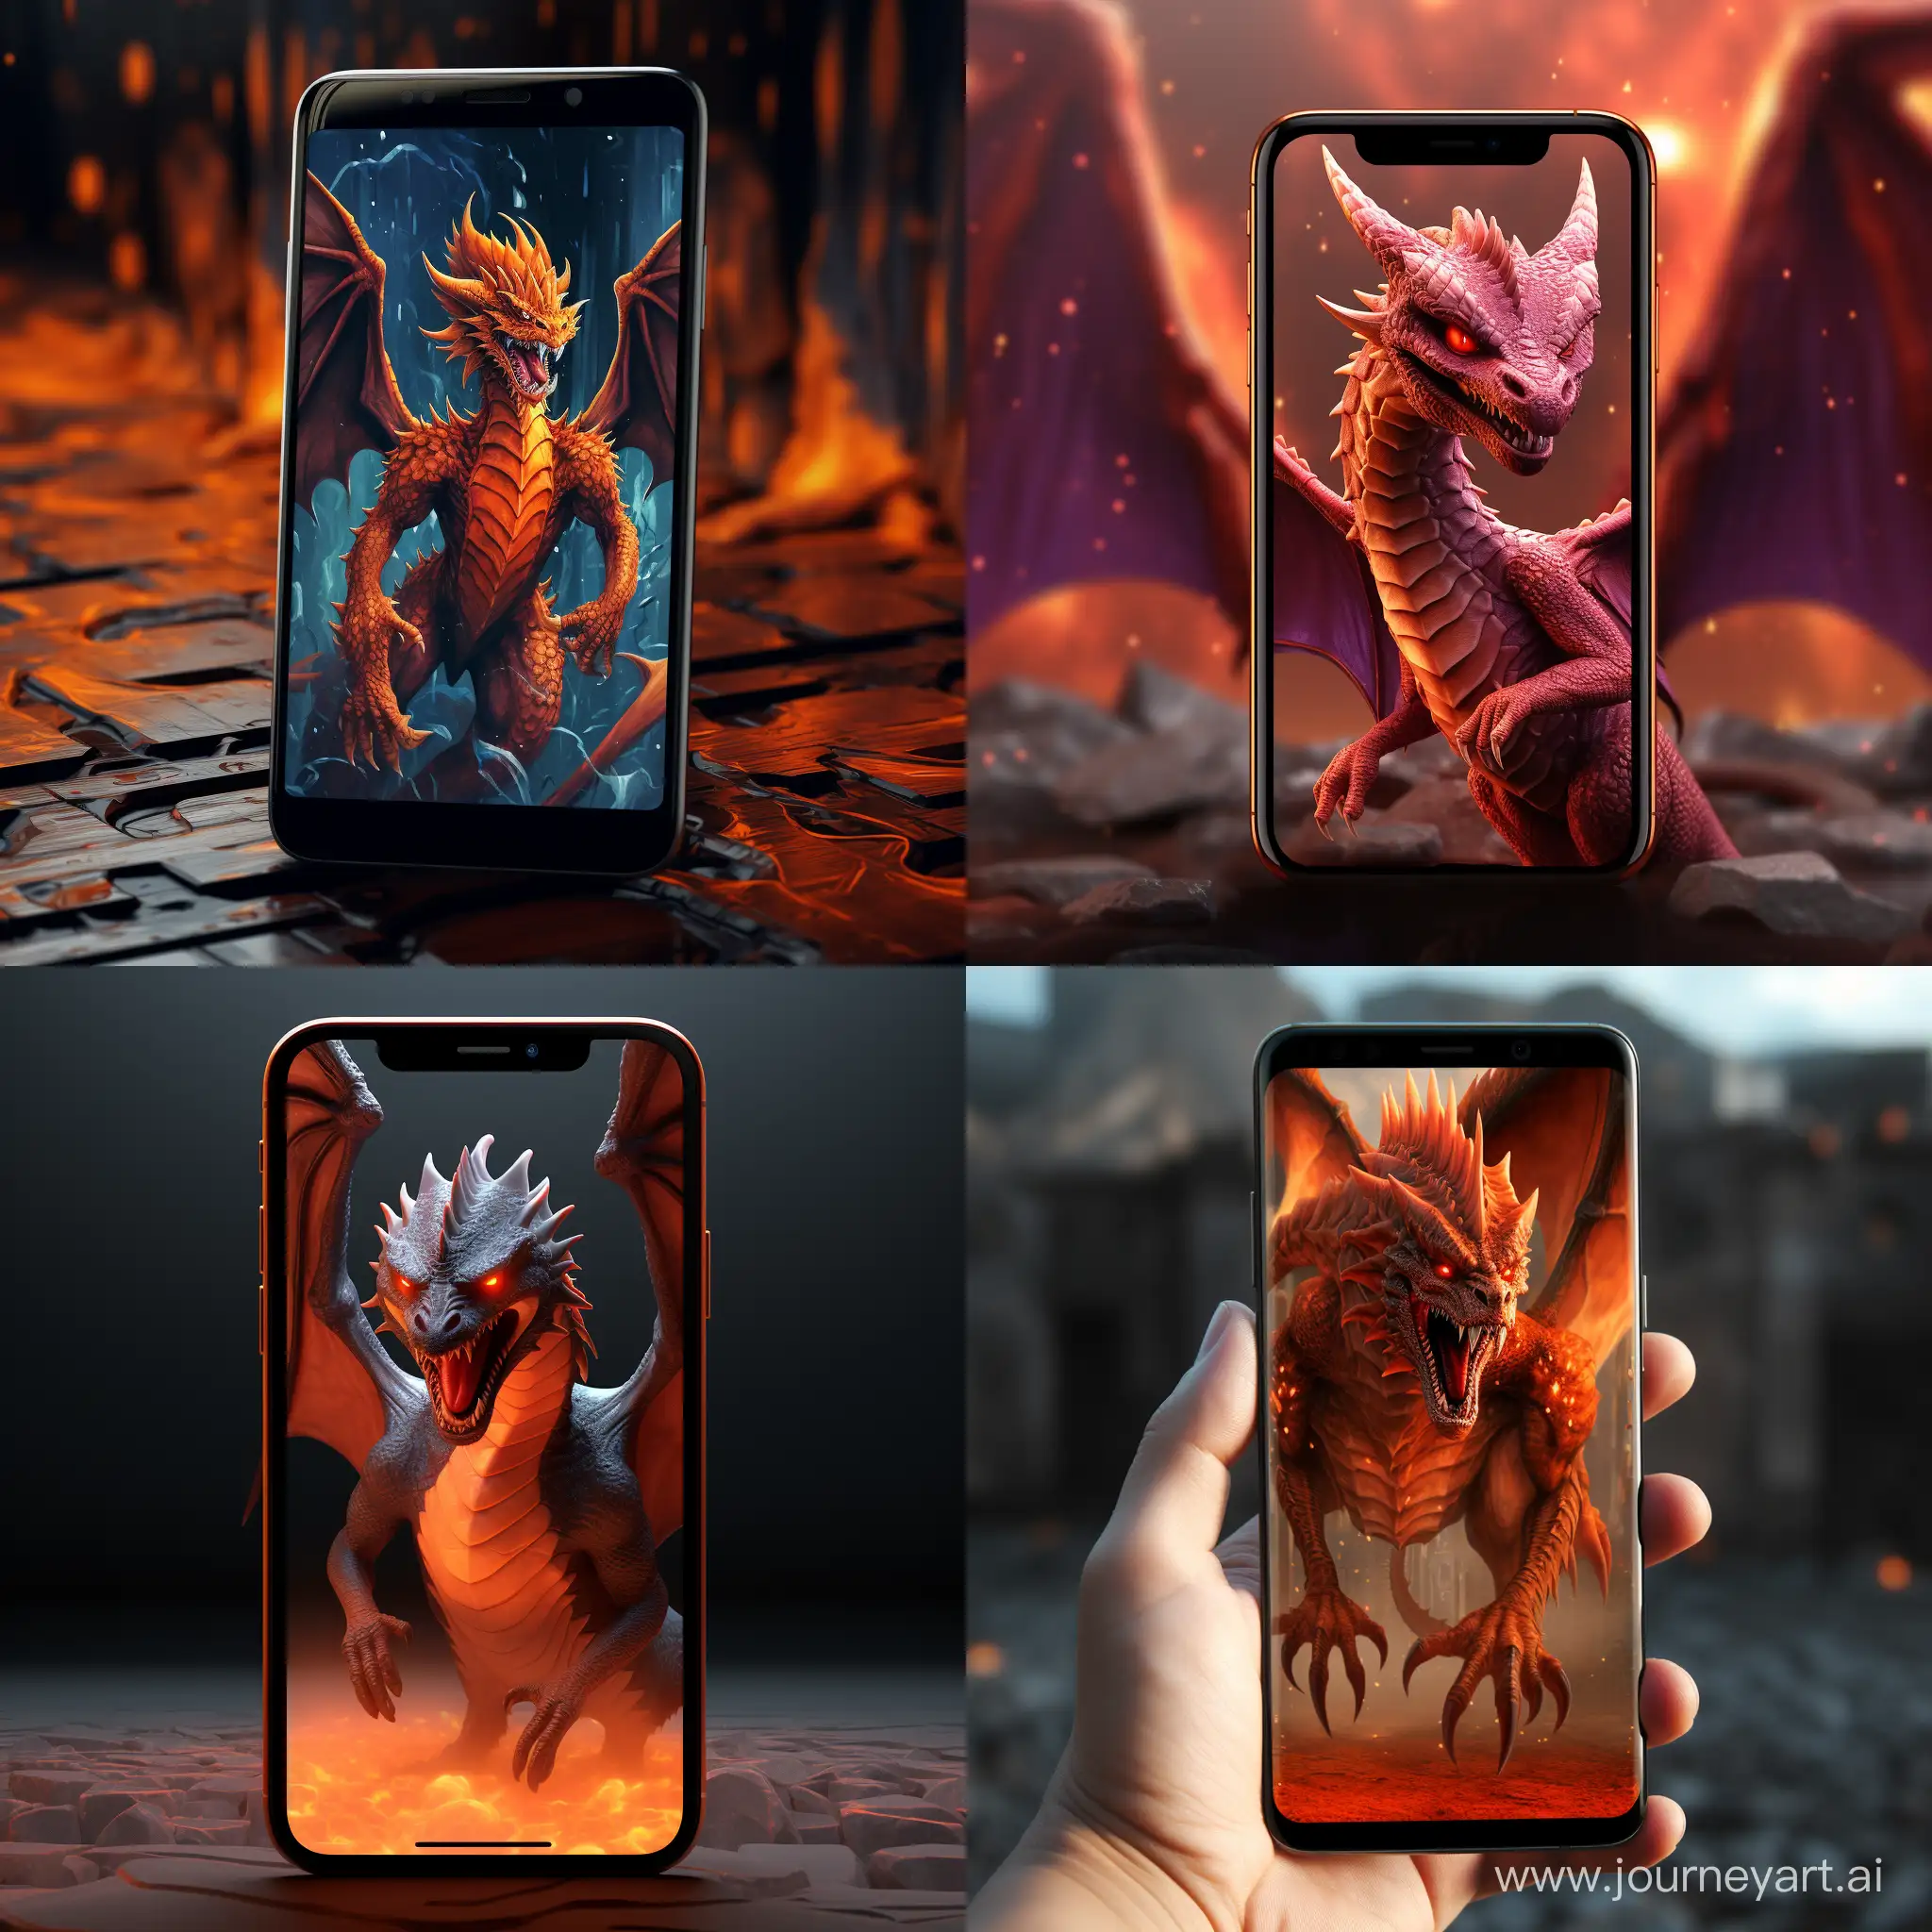 Hyperrealistic-Charizard-Wallpaper-for-Android-Phone-11-Aspect-Ratio-No-3911